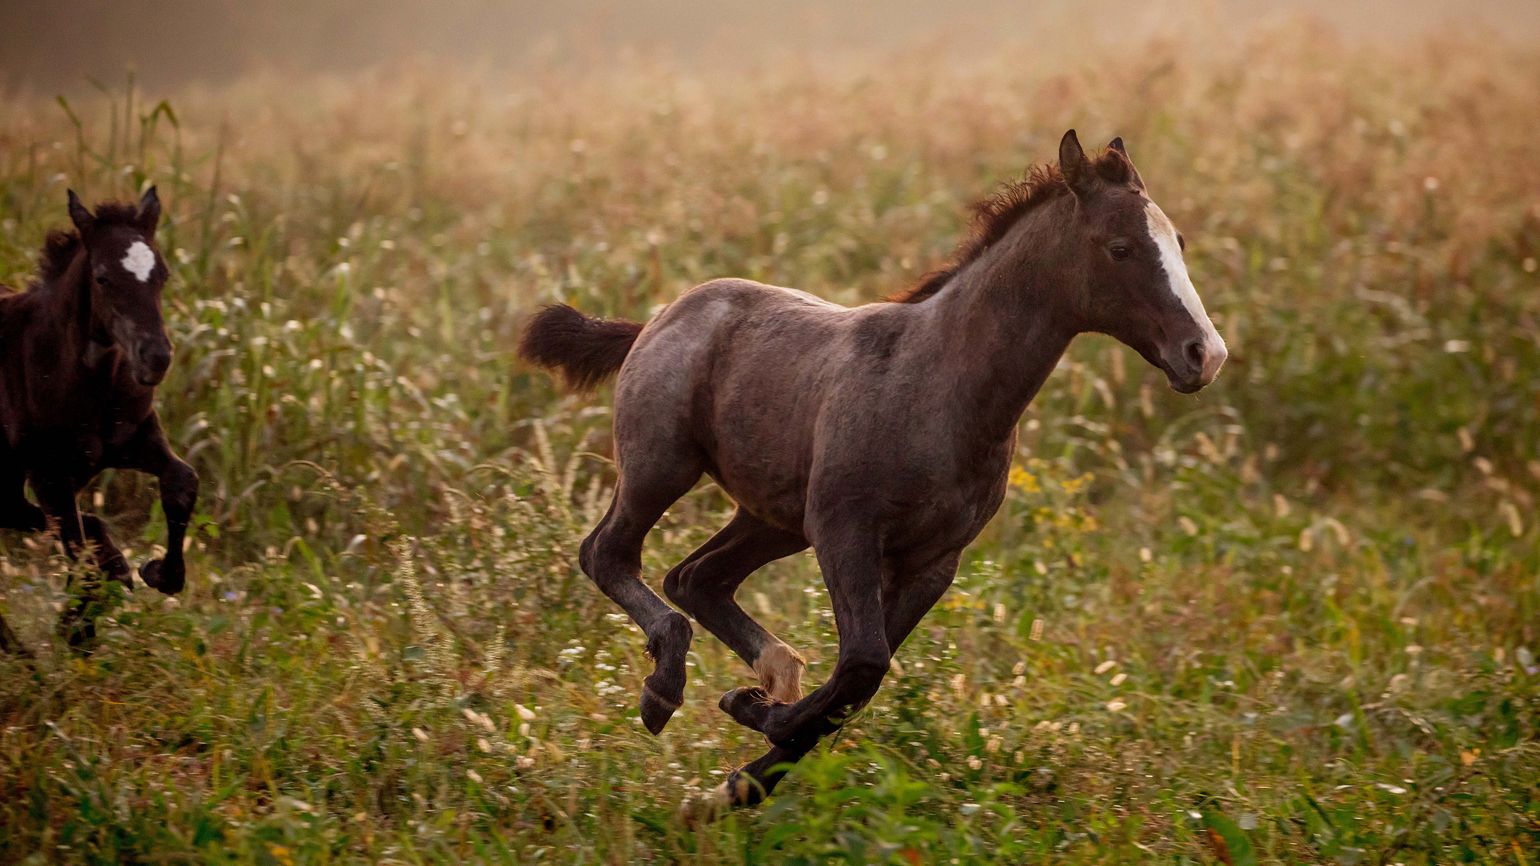 Playful foals chase each other through the pasture.